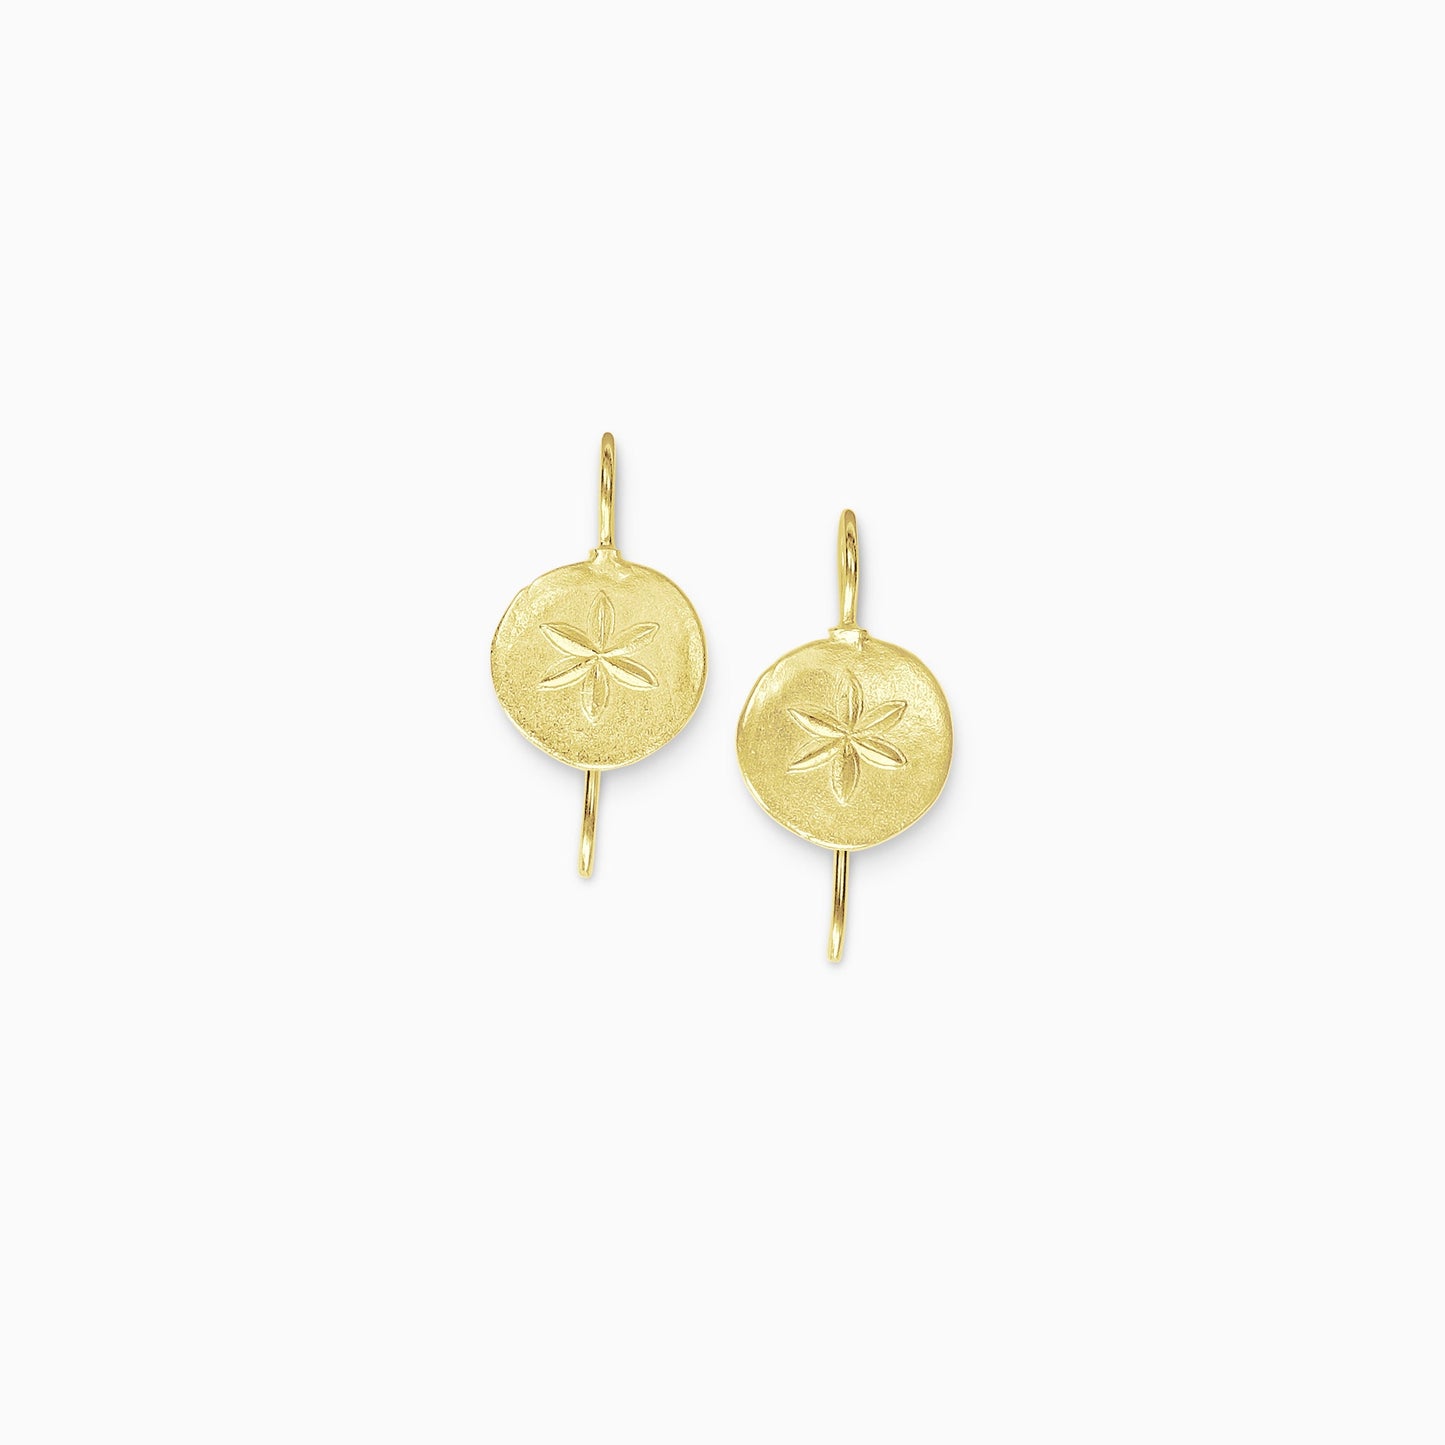 A pair of 18ct Fairtrade yellow gold organically circular textured drop earrings . A six petal flower, similar to a silver dollar is embossed in the centre of the earring which is fastened with a hook. 25mm length, 14mm diameter